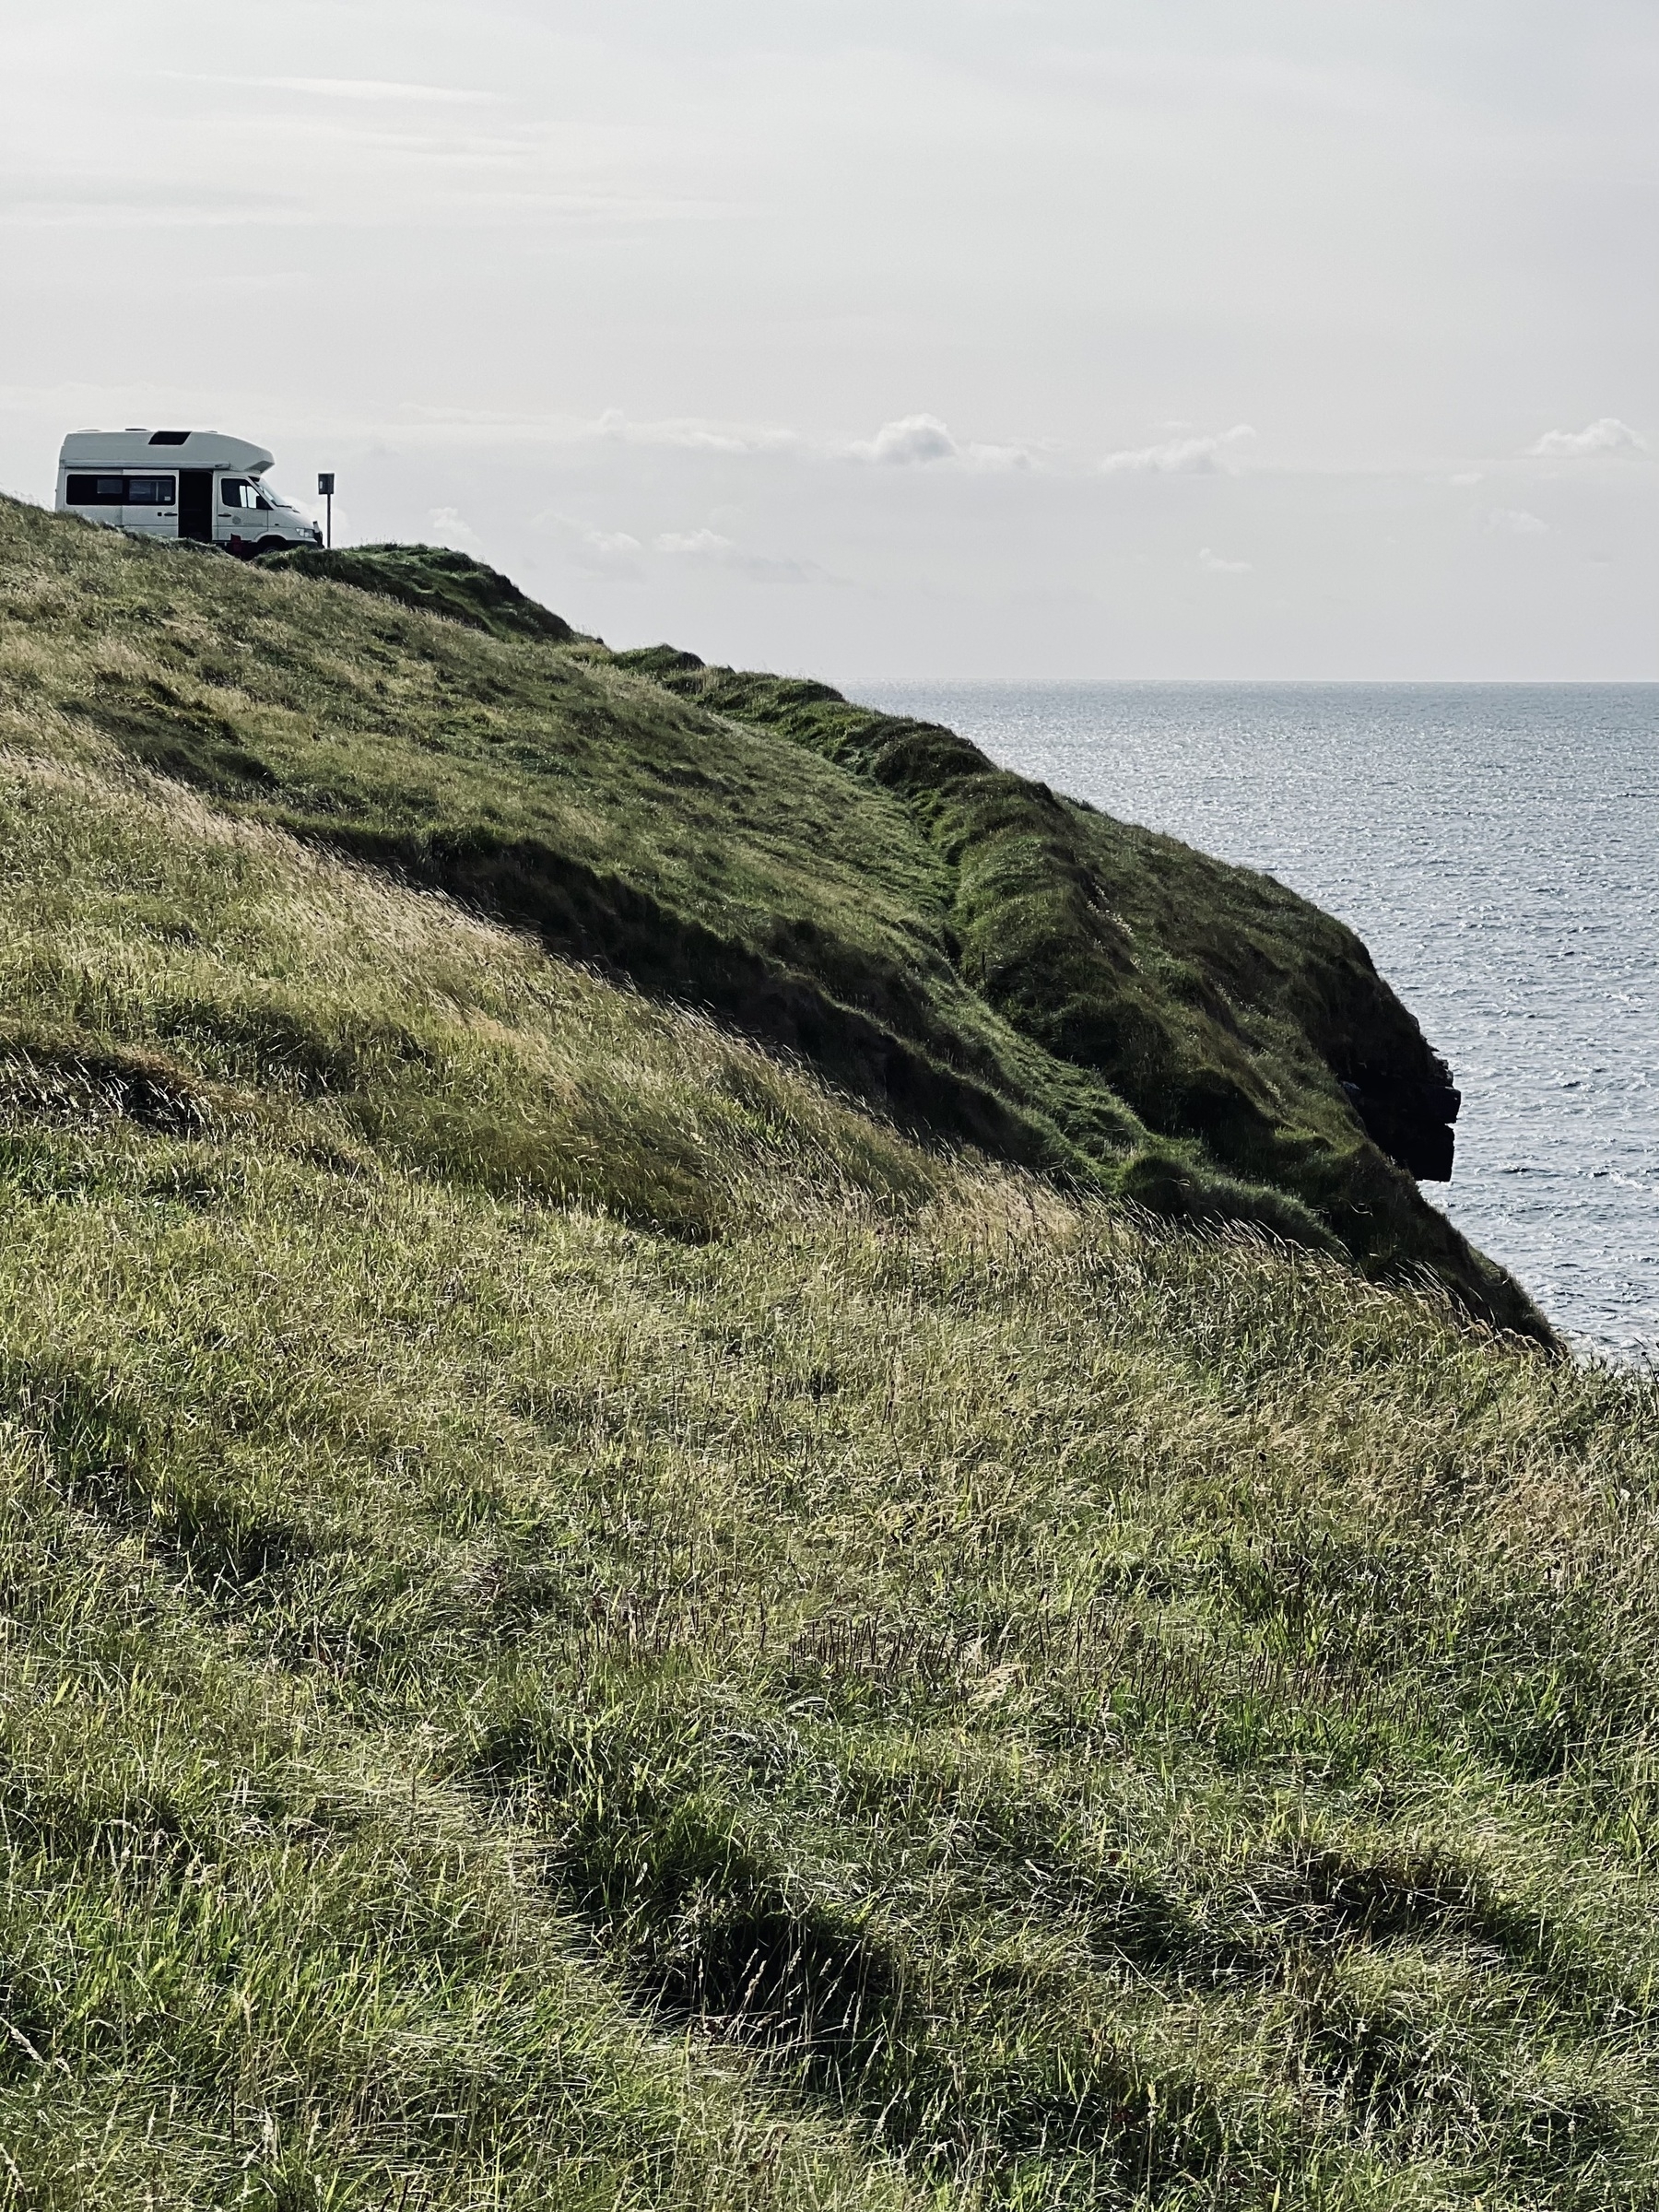 A room with a view. Camper van overlooking the sea.&10;